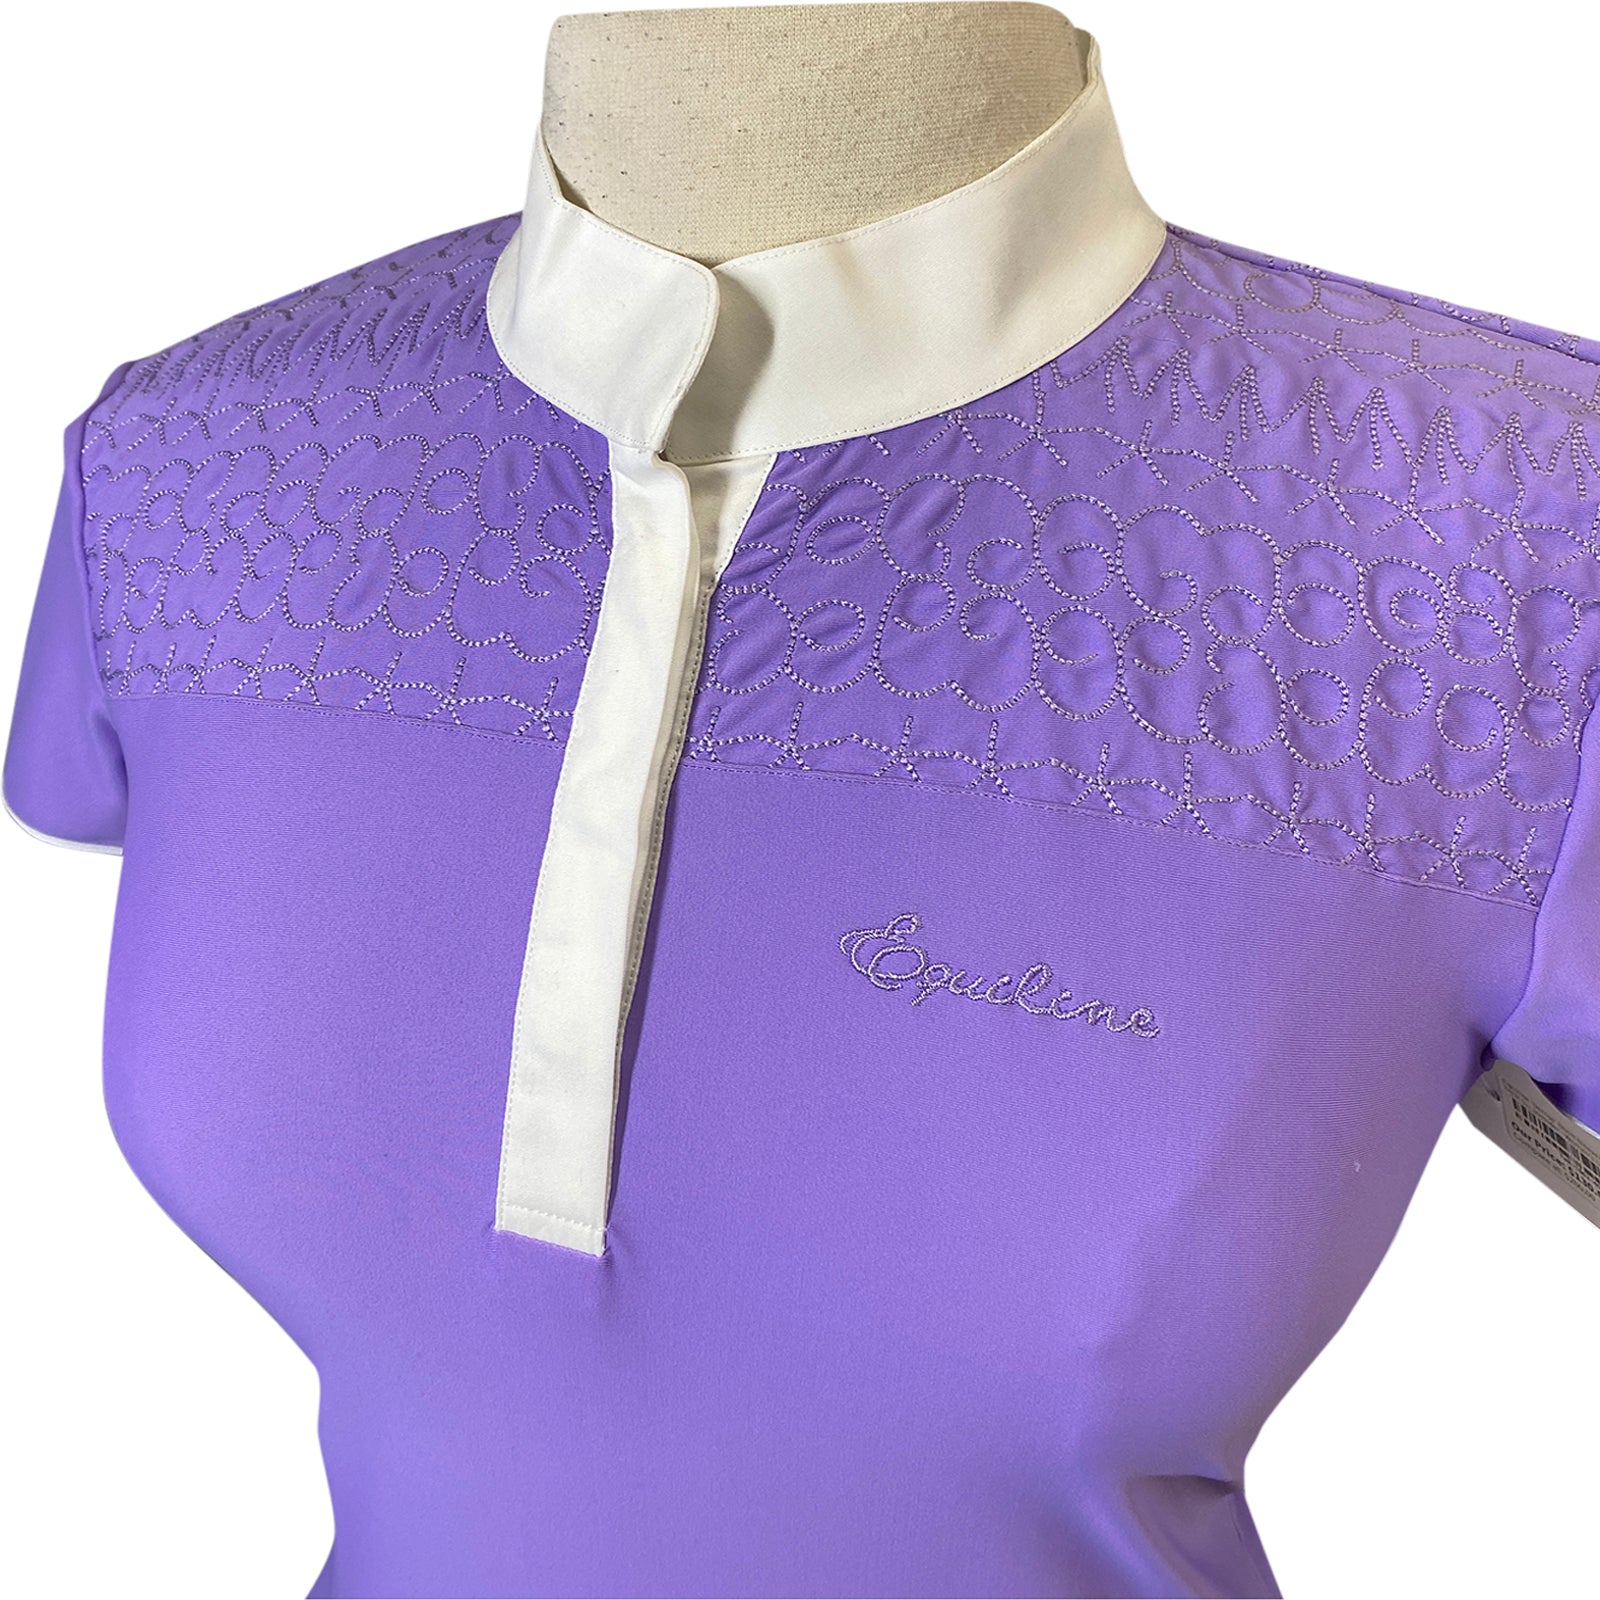 Equiline &#39;Denise&#39; Short Sleeve Competition Shirt in Lavender